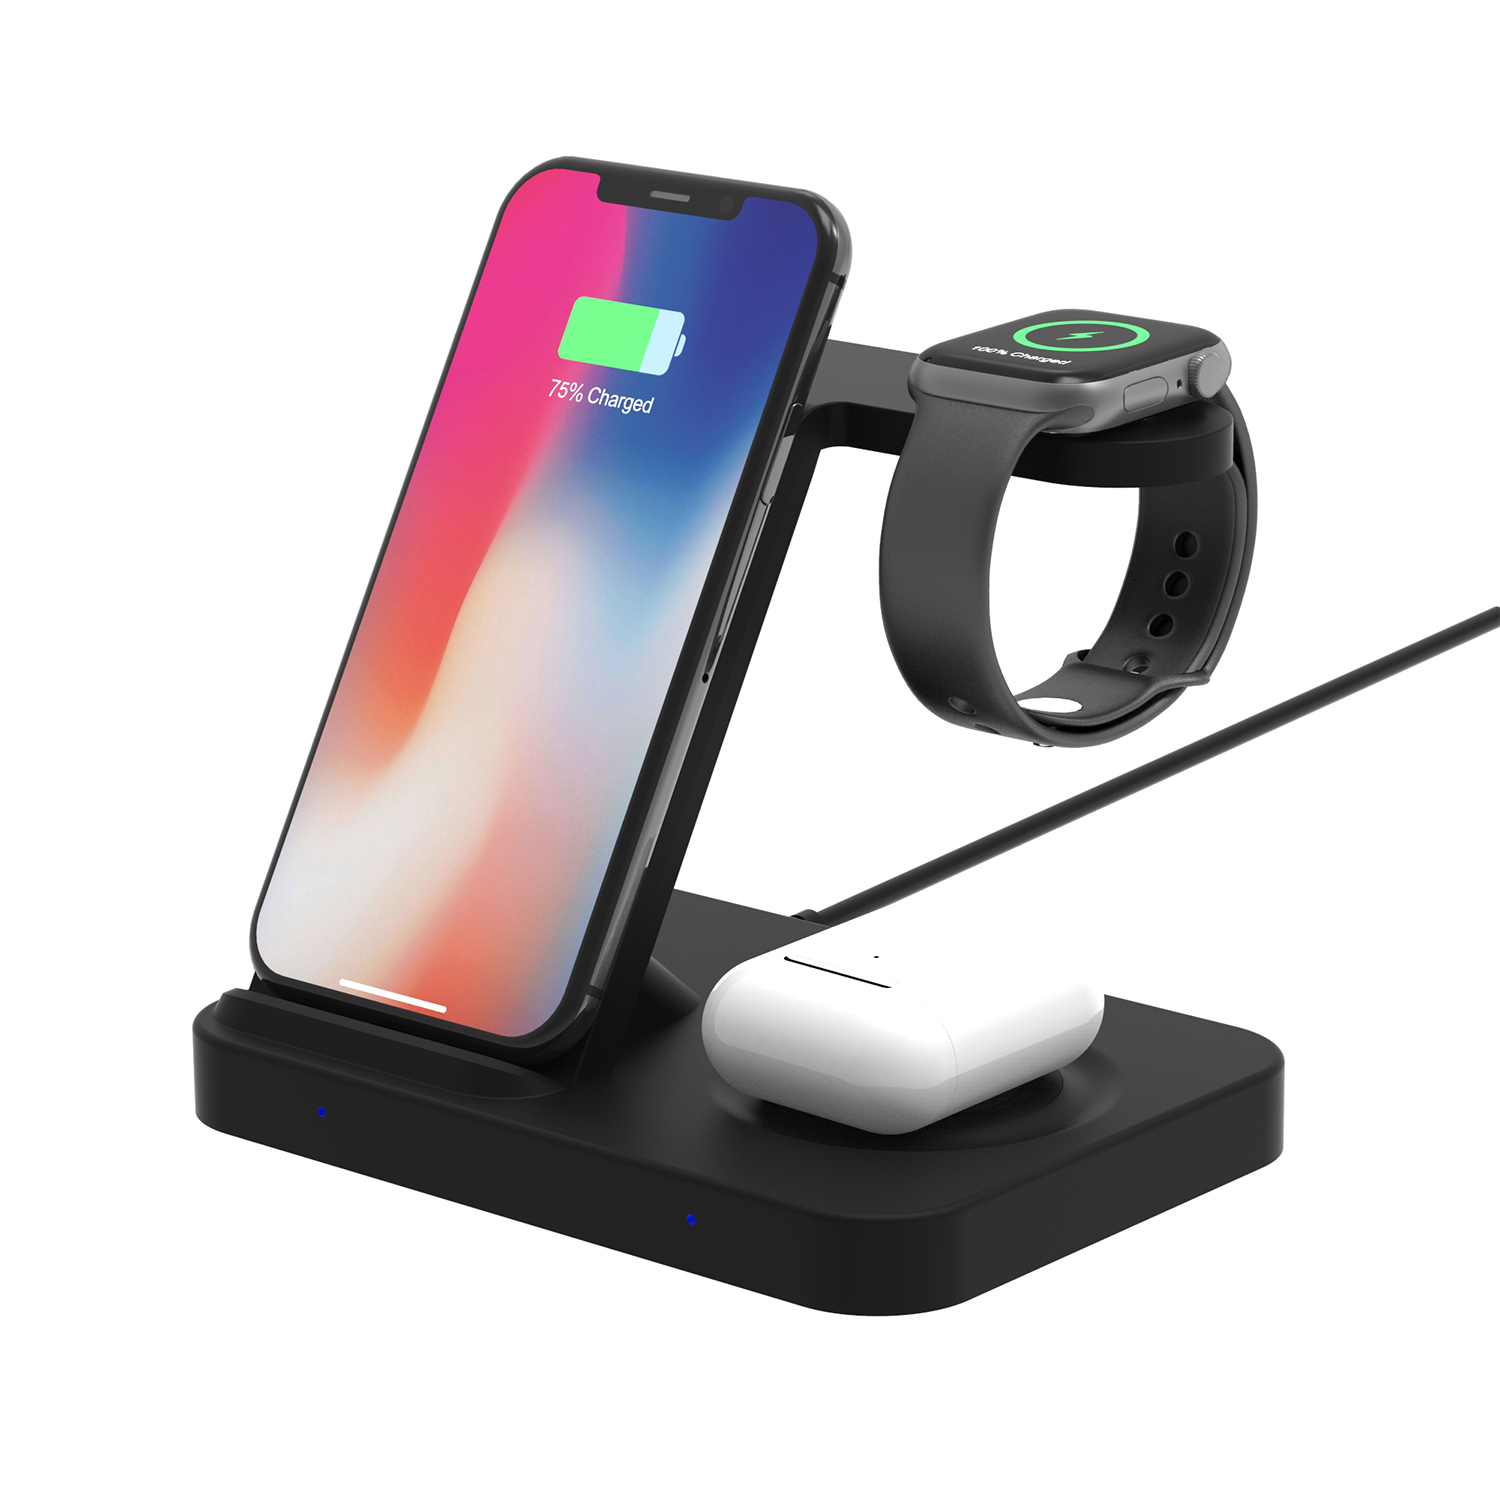 Private Mould 3 in 1 Fast Wireless Charging Stand for iPhone 11 Pro / XS Max و AirPods Pro / 2 و iWatch Series 5/4/3/2/1 و Galaxy Watch و Galaxy Buds (MH-Q475B)